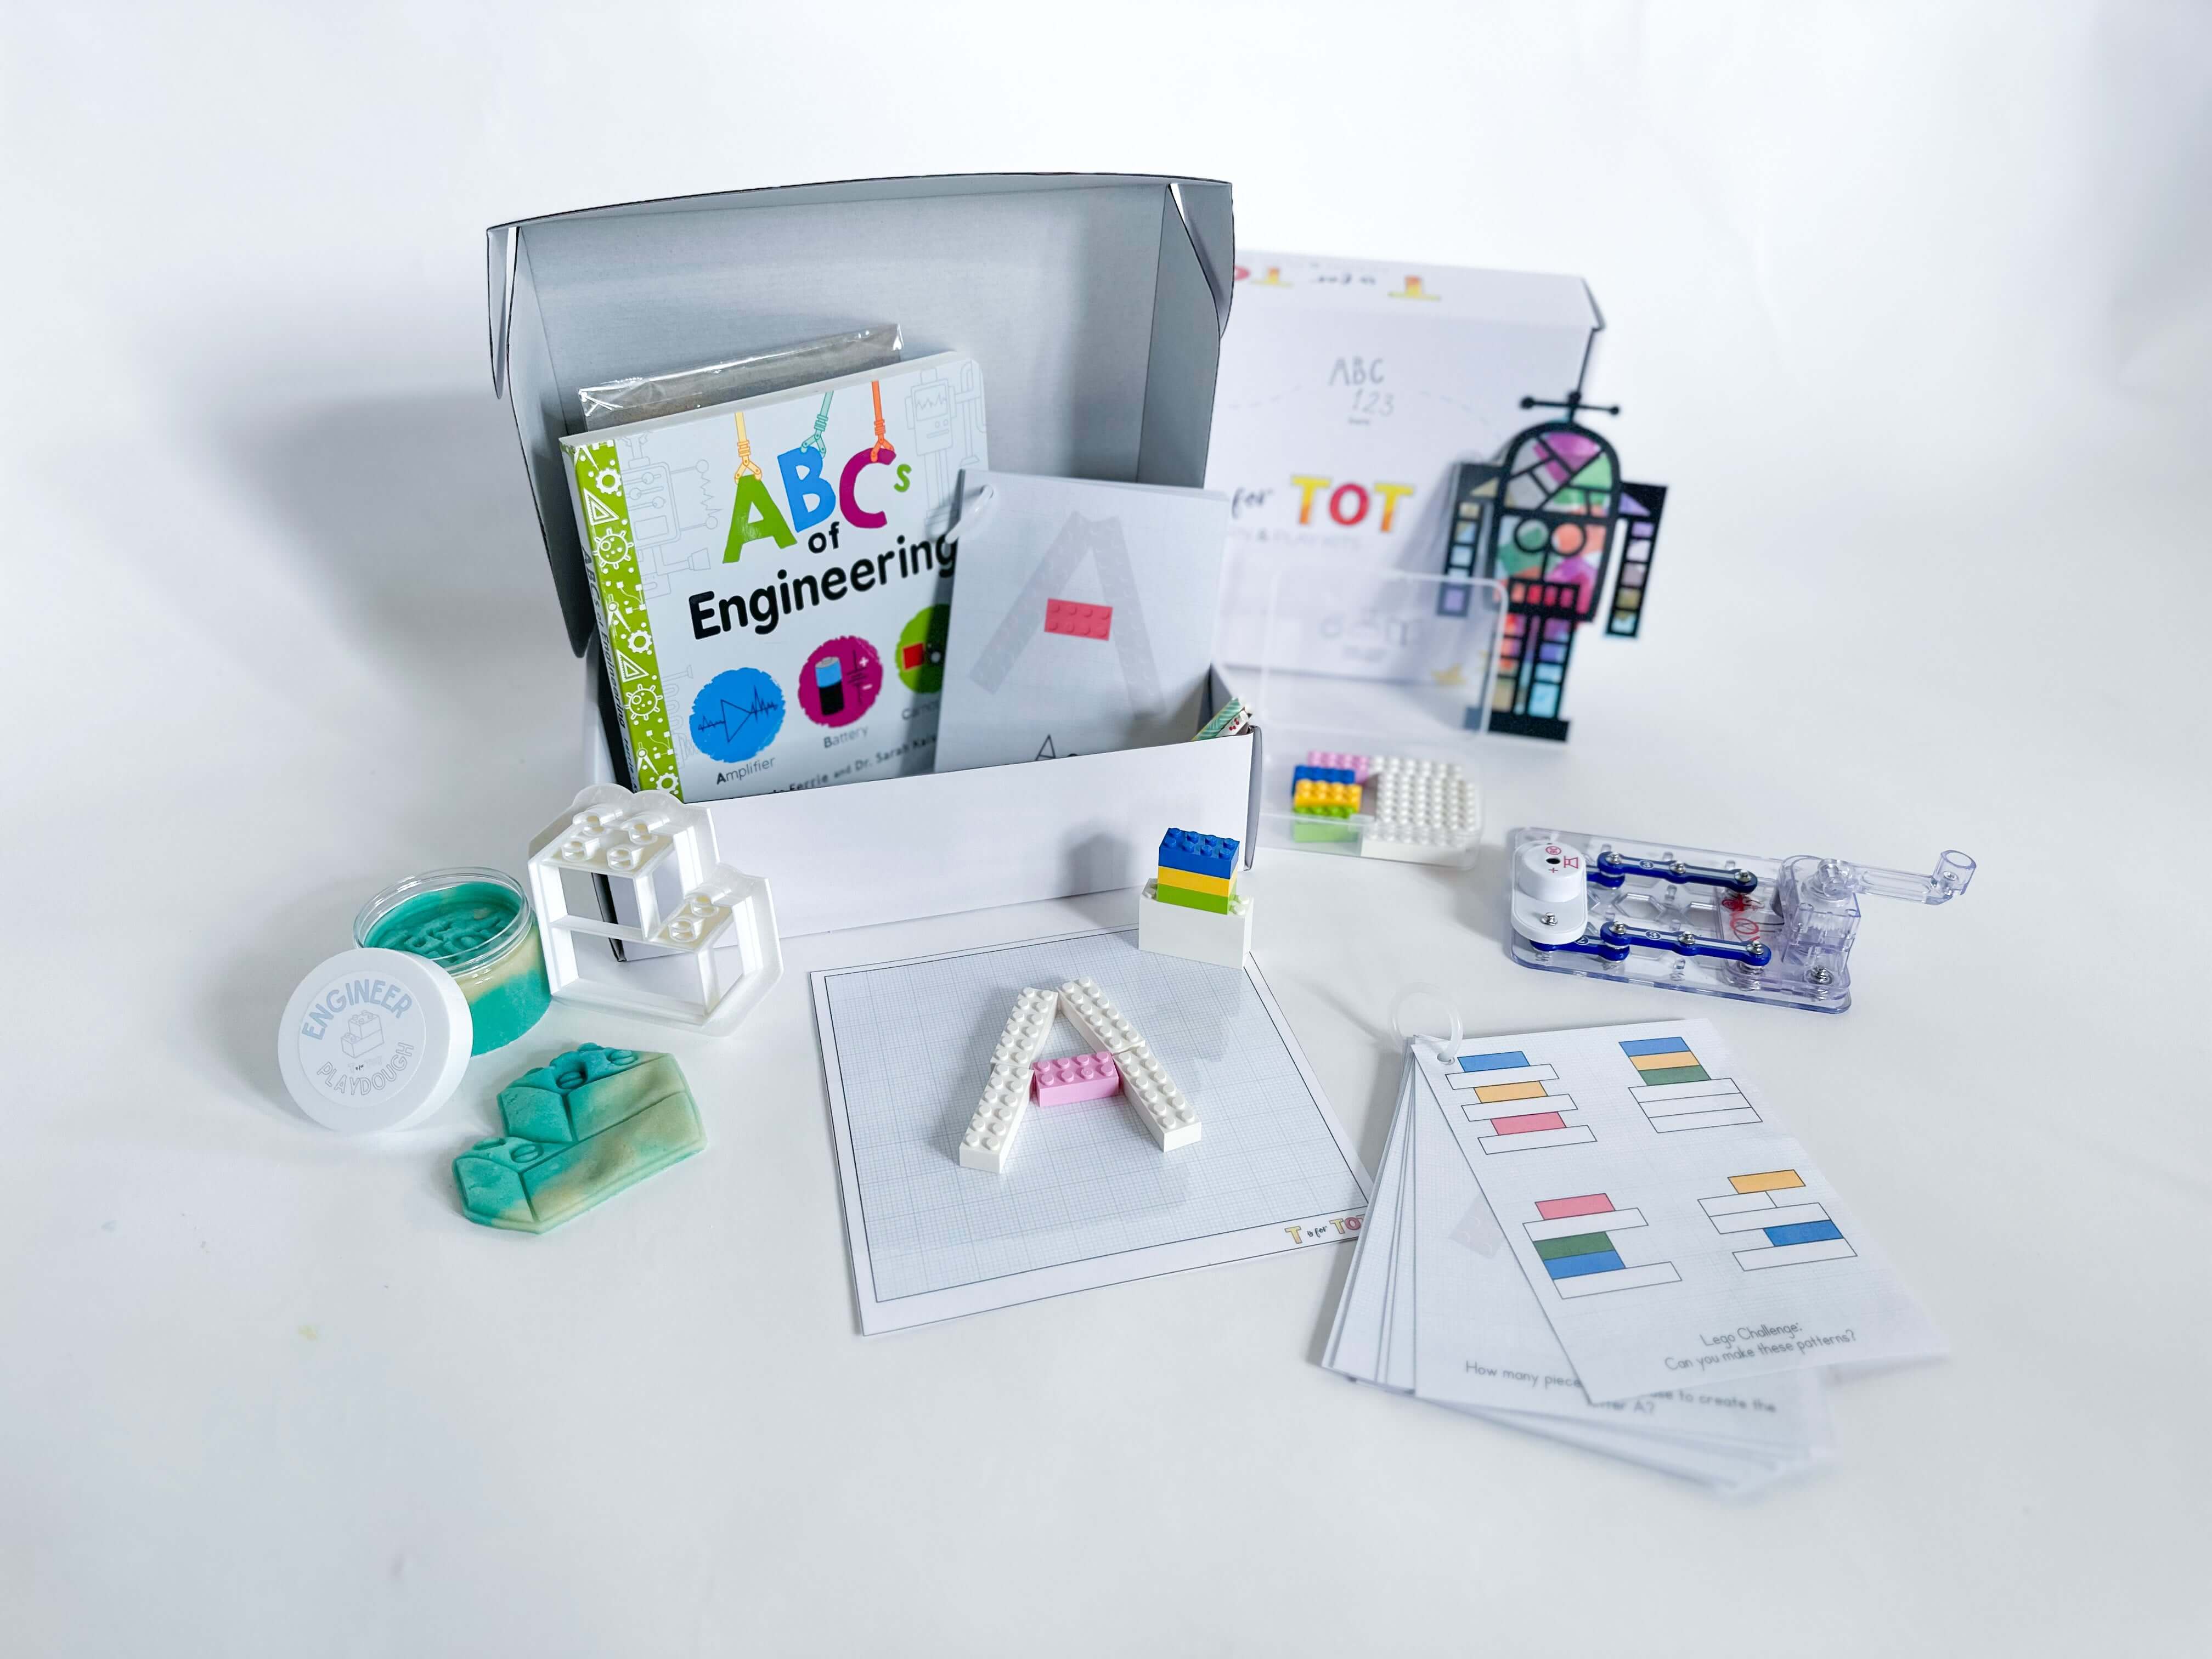 STEM-focused play and learn kit for kids aged 3-6. Includes a battery-free snap circuit, Lego playdough cutter with homemade playdough, straw STEM activity, Robot Suncatcher, Lego pieces, Lego educational cards, and 